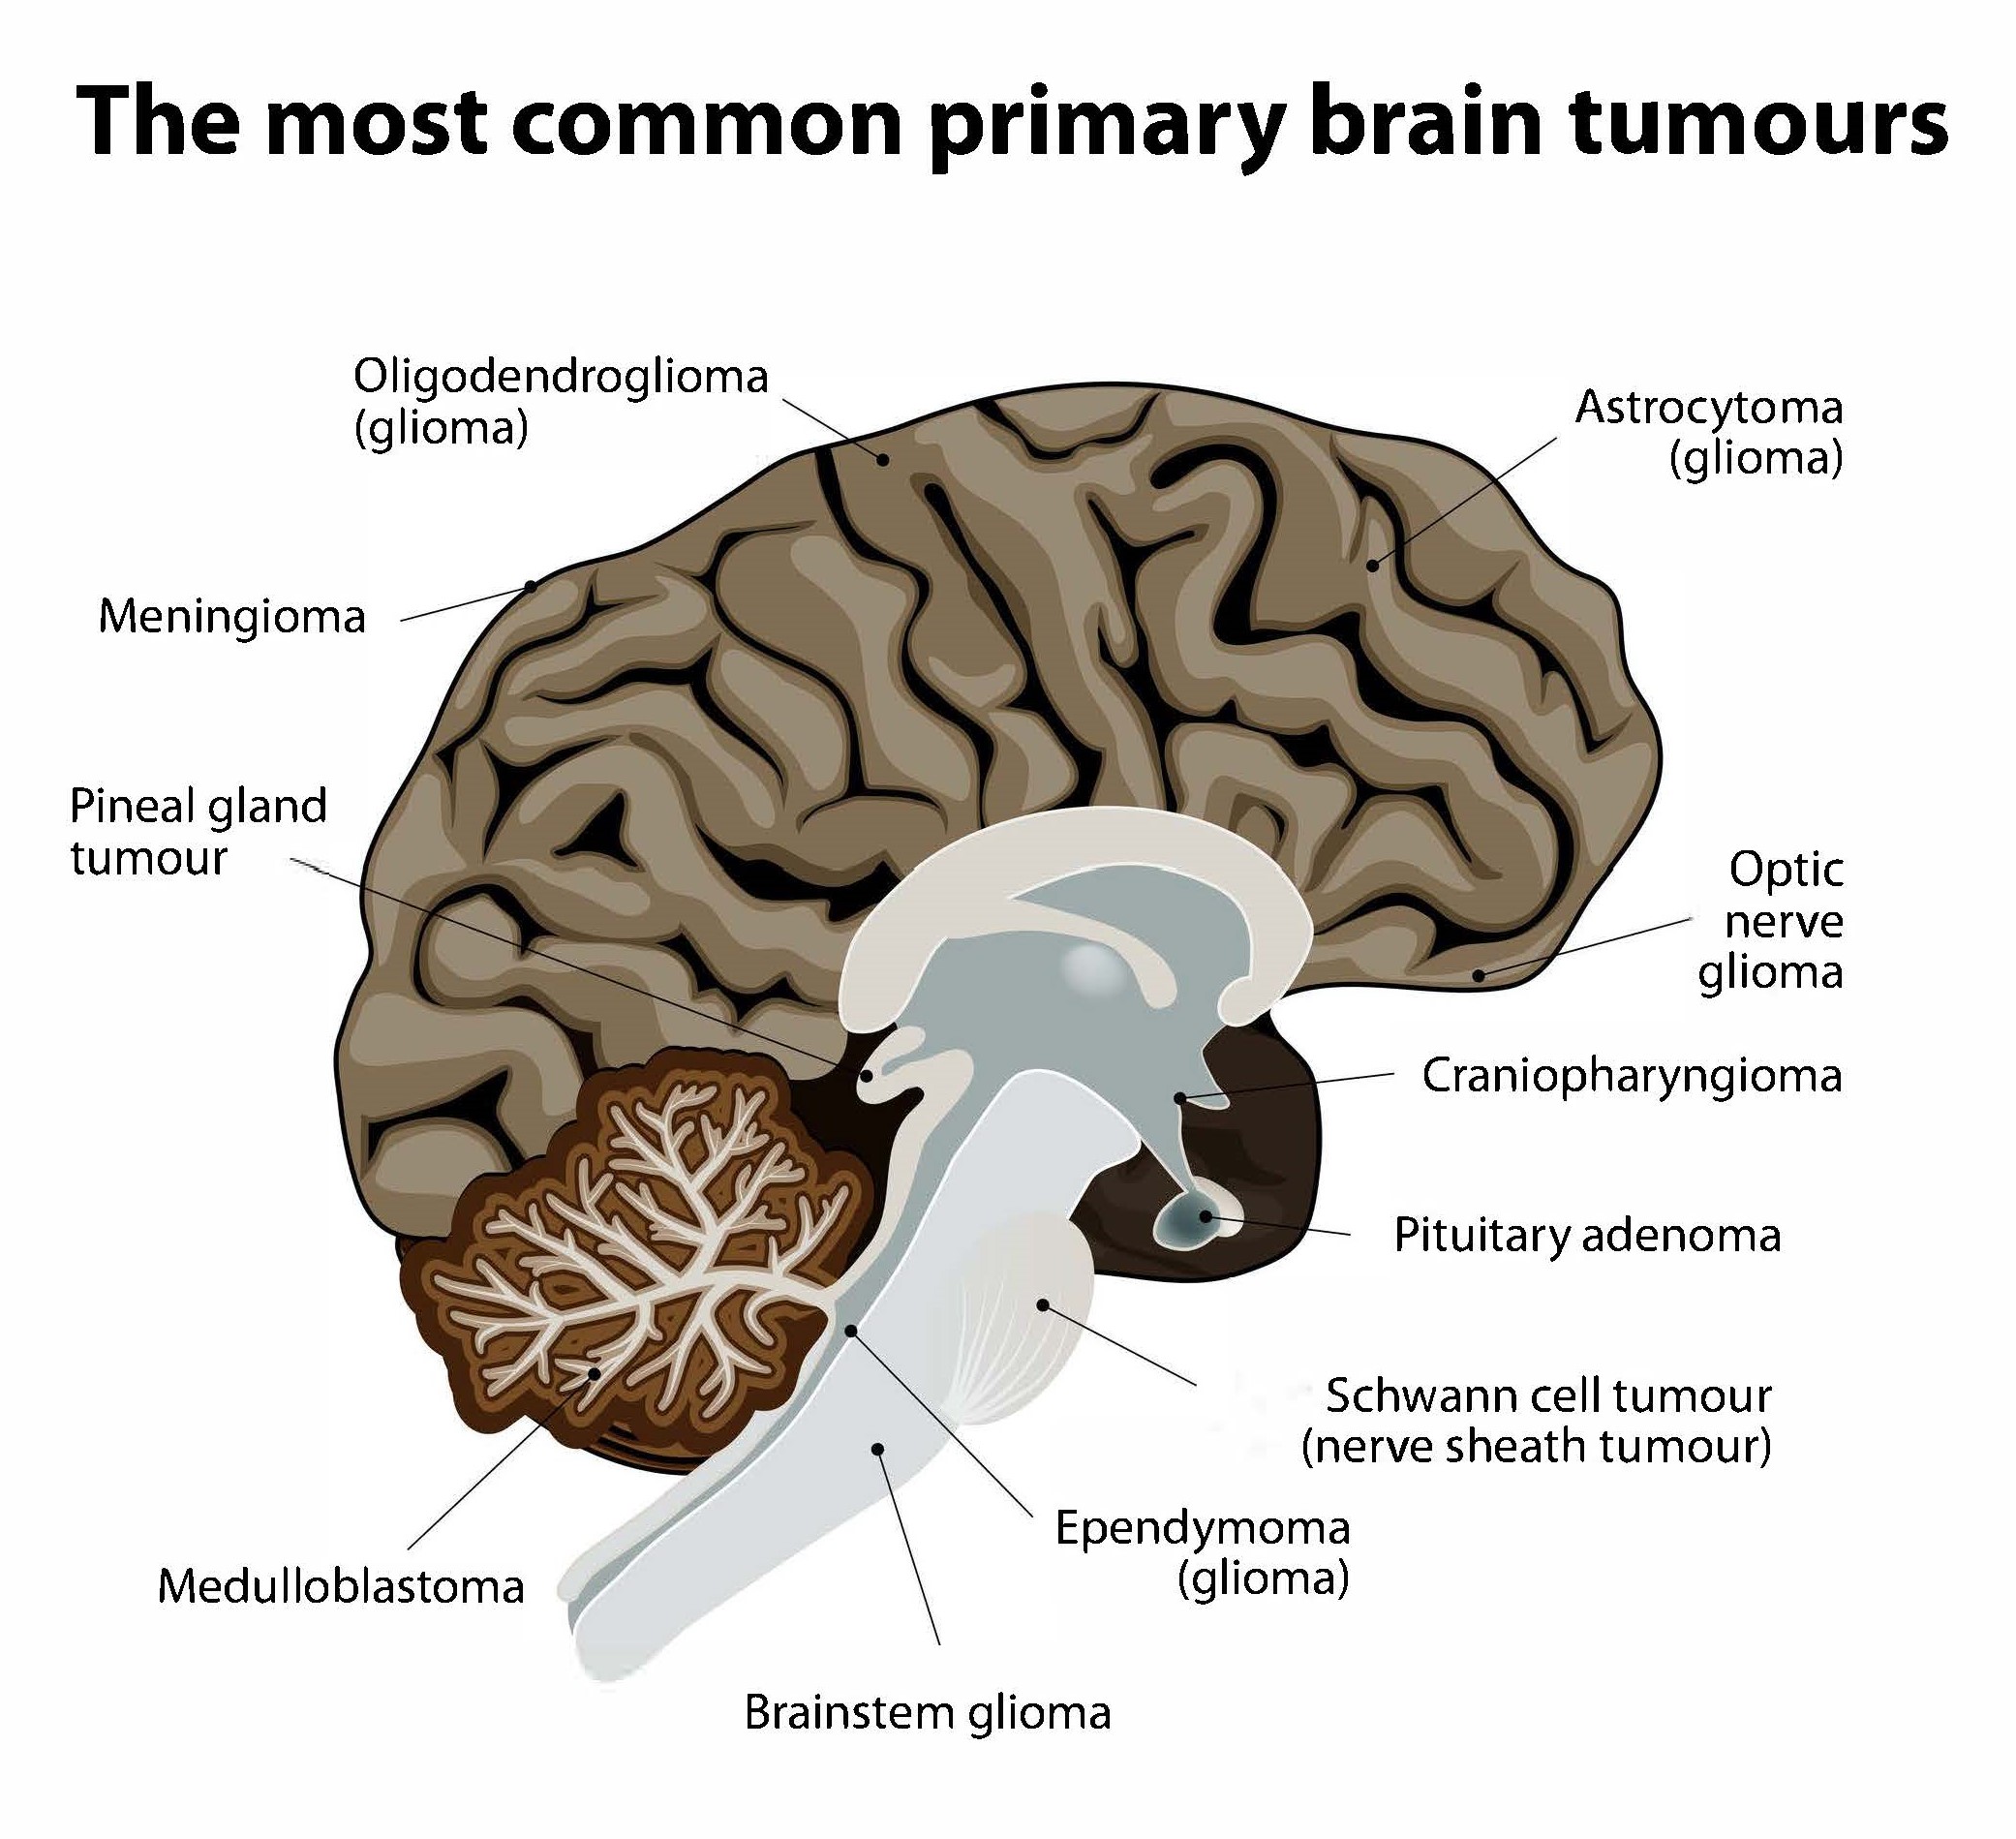 How to Detect Brain Tumours Earlier to Improve Survival